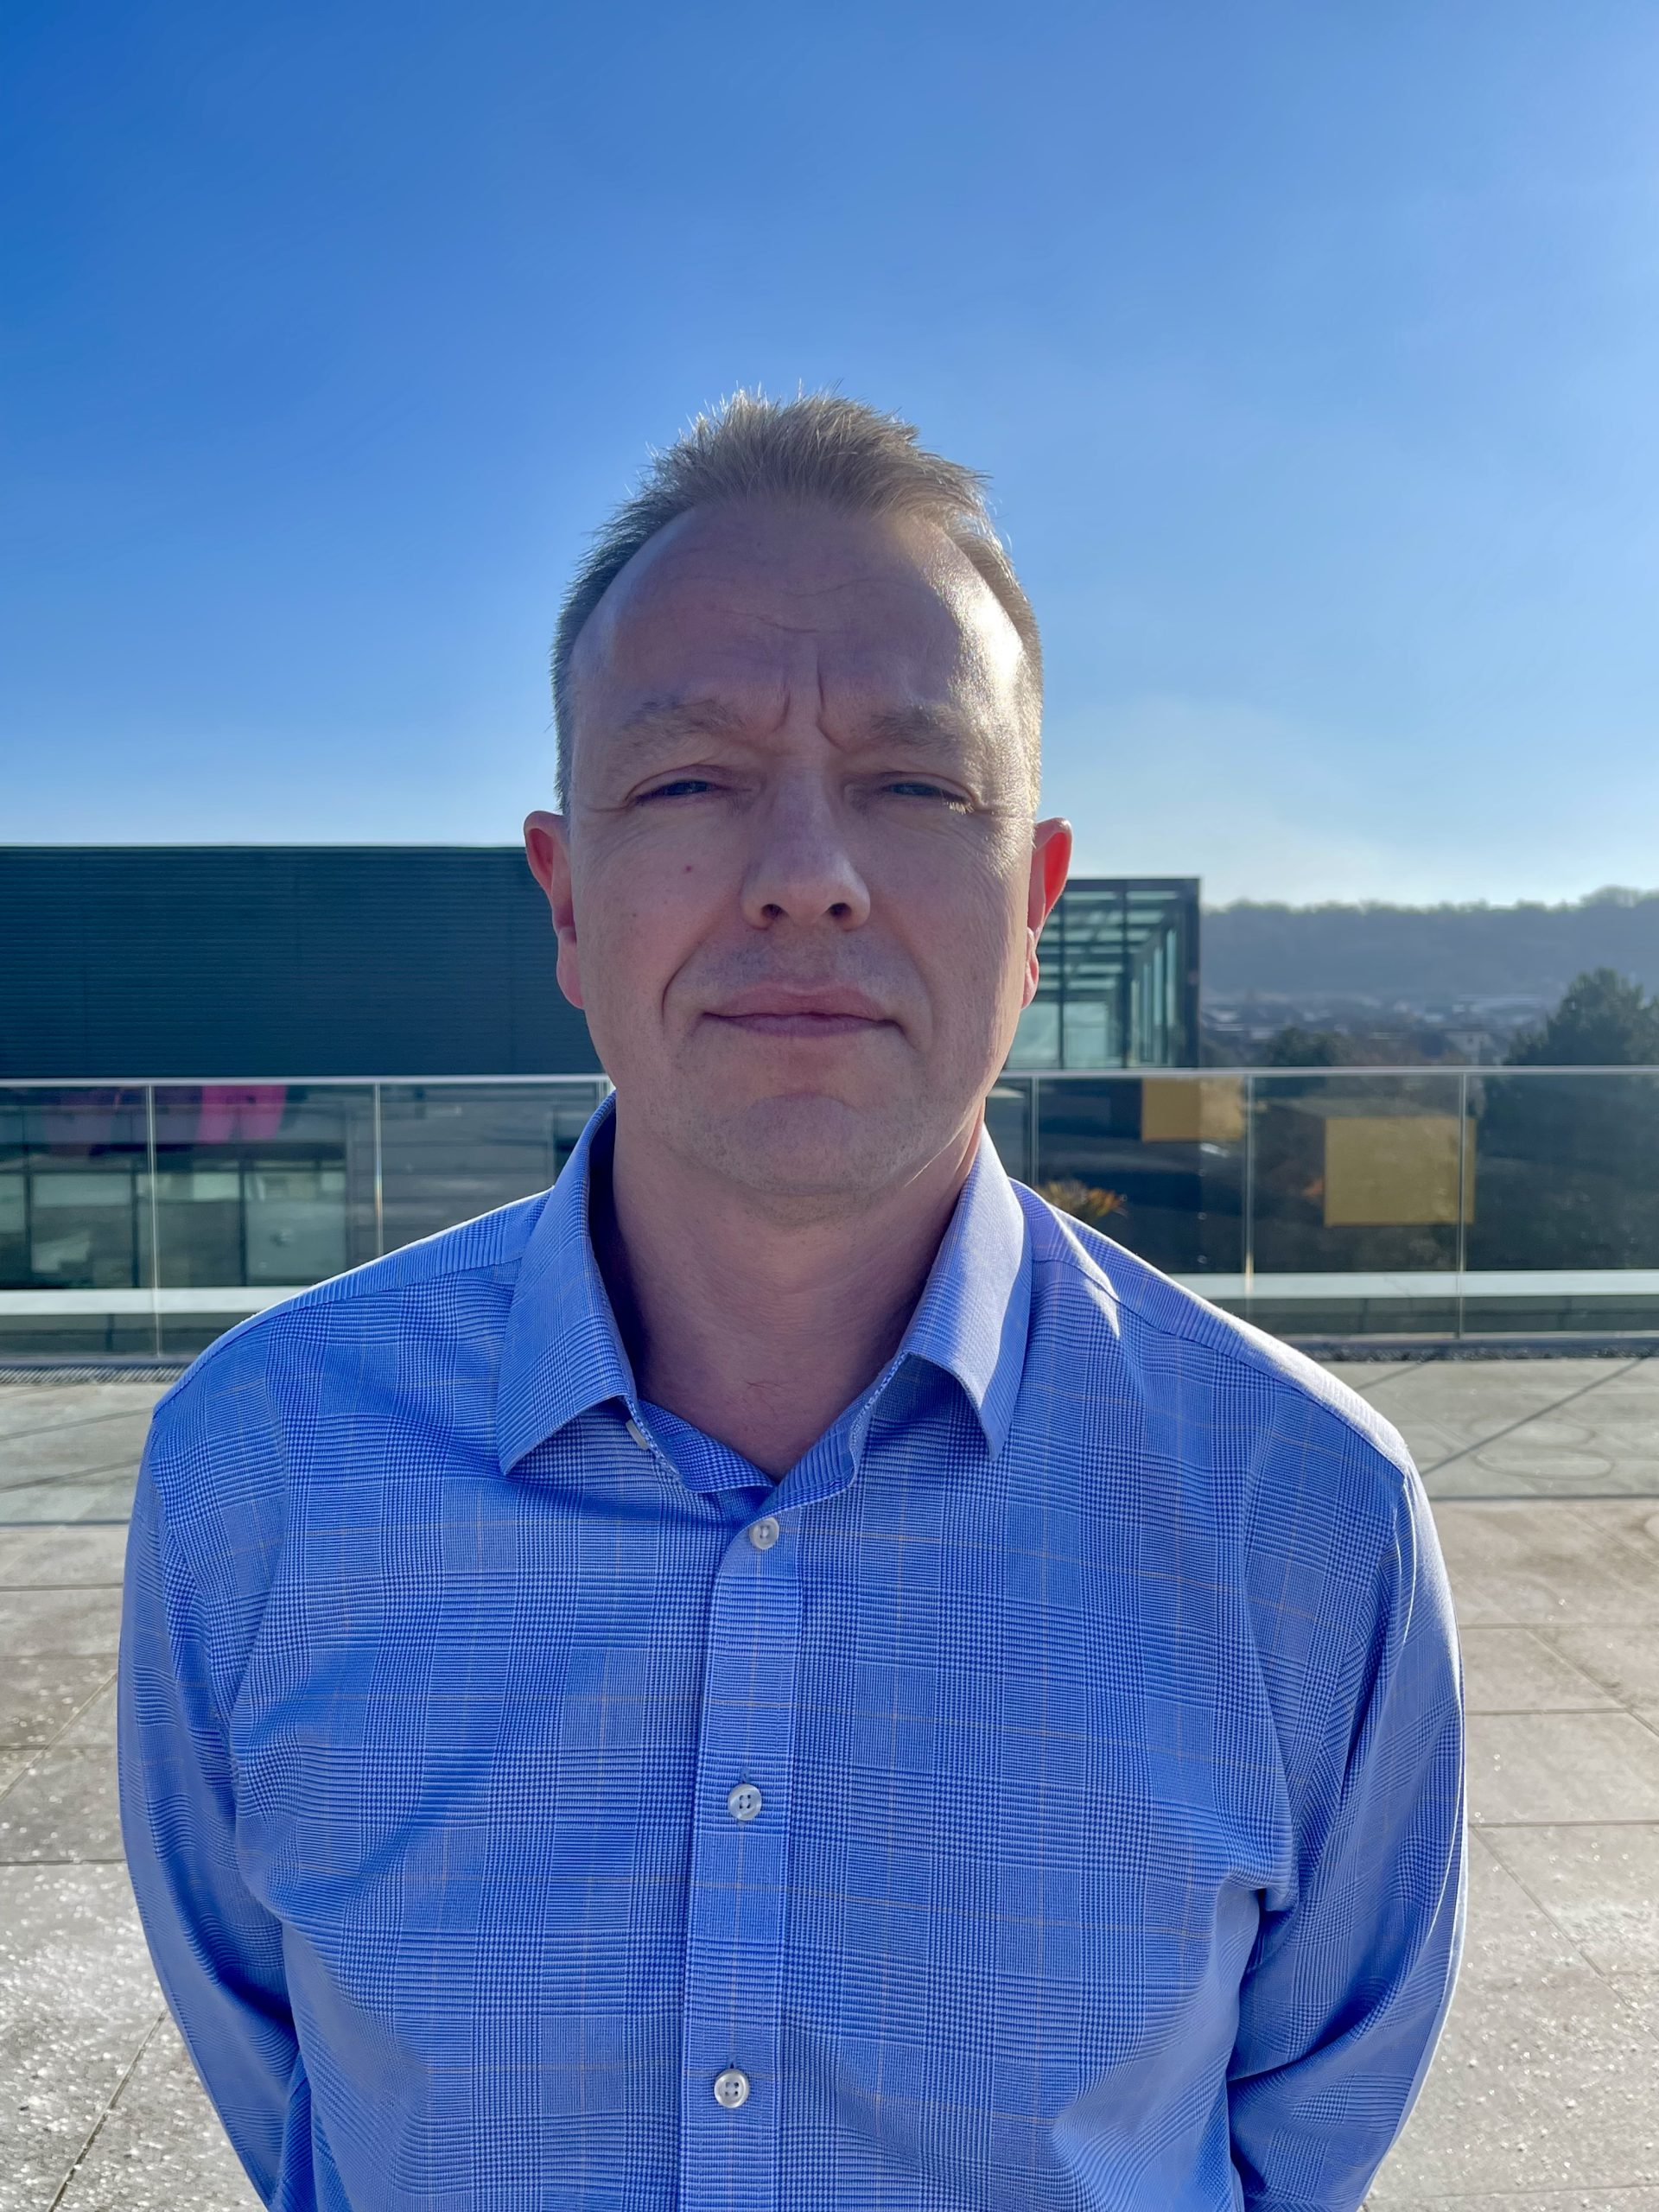 Imperial Tobacco appoints Paul Coggins as Head of Trade Marketing UK